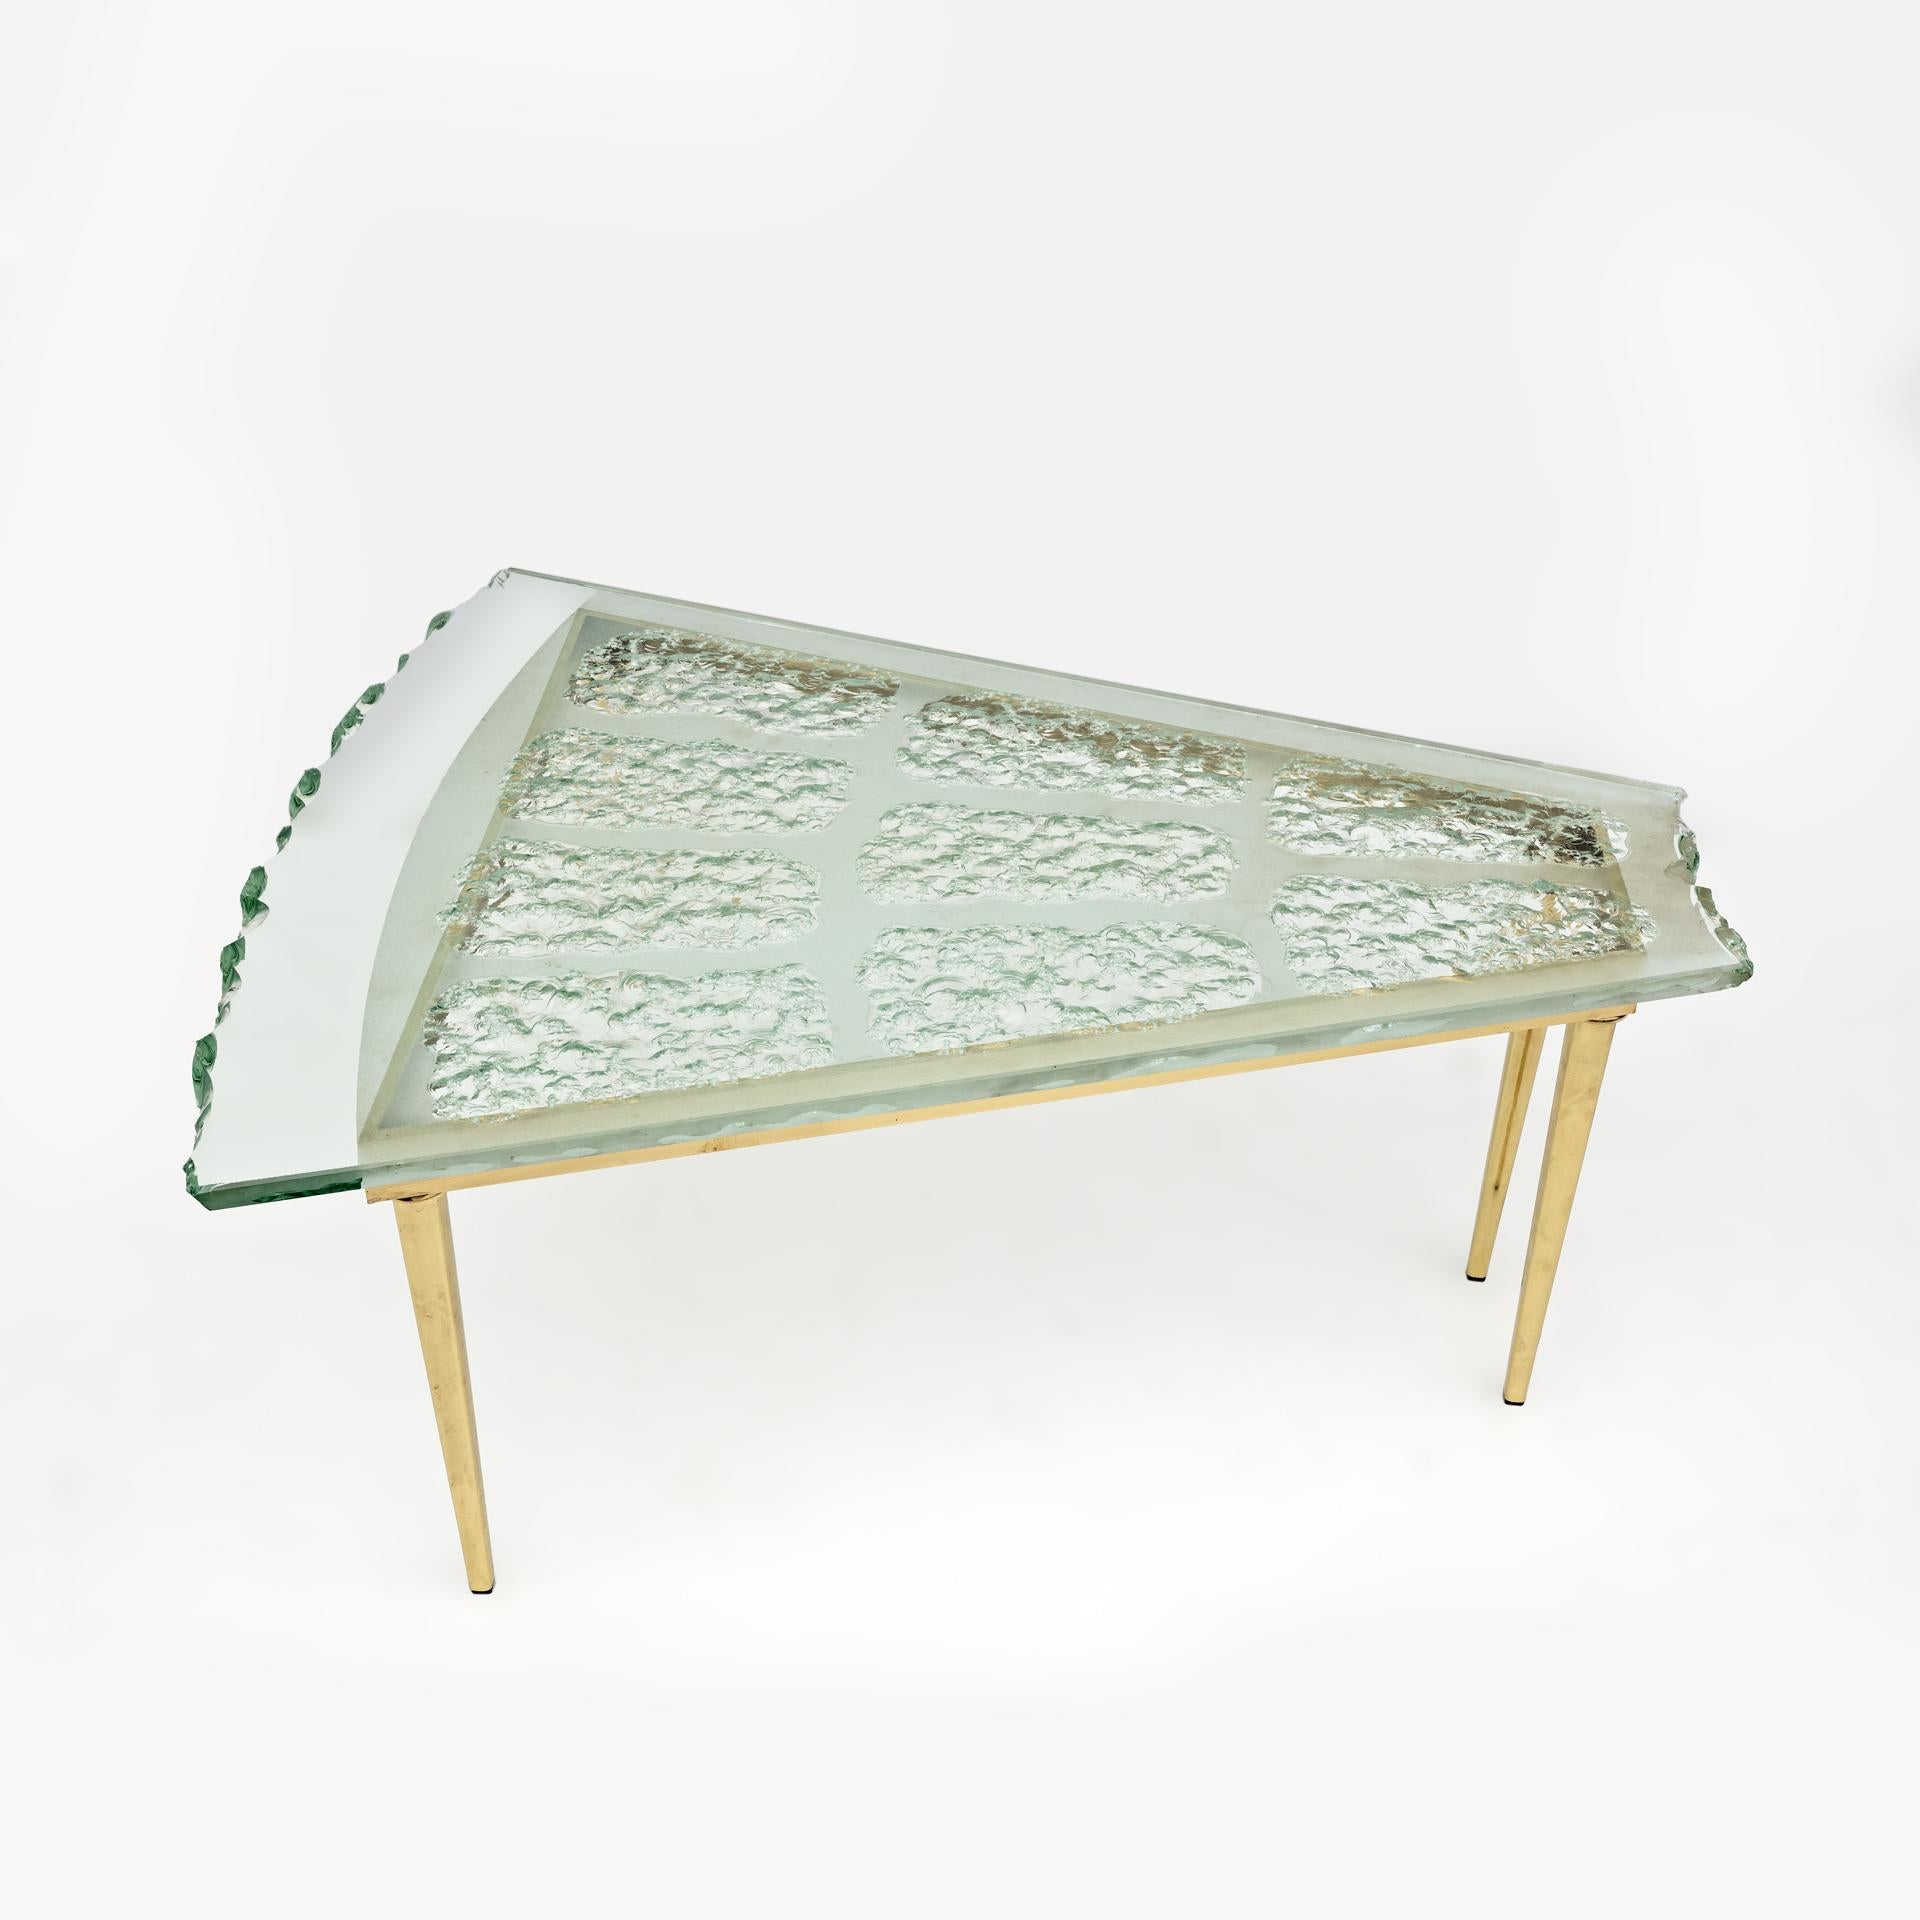 Extraordinary mid-century Italian coffee table in hand-chiselled and frosted Murano glass, attributed to Max Ingrand and produced by Fontana Arte. The detailed engraved coffee table is supported by a brass frame, sitting on four feet. This table can